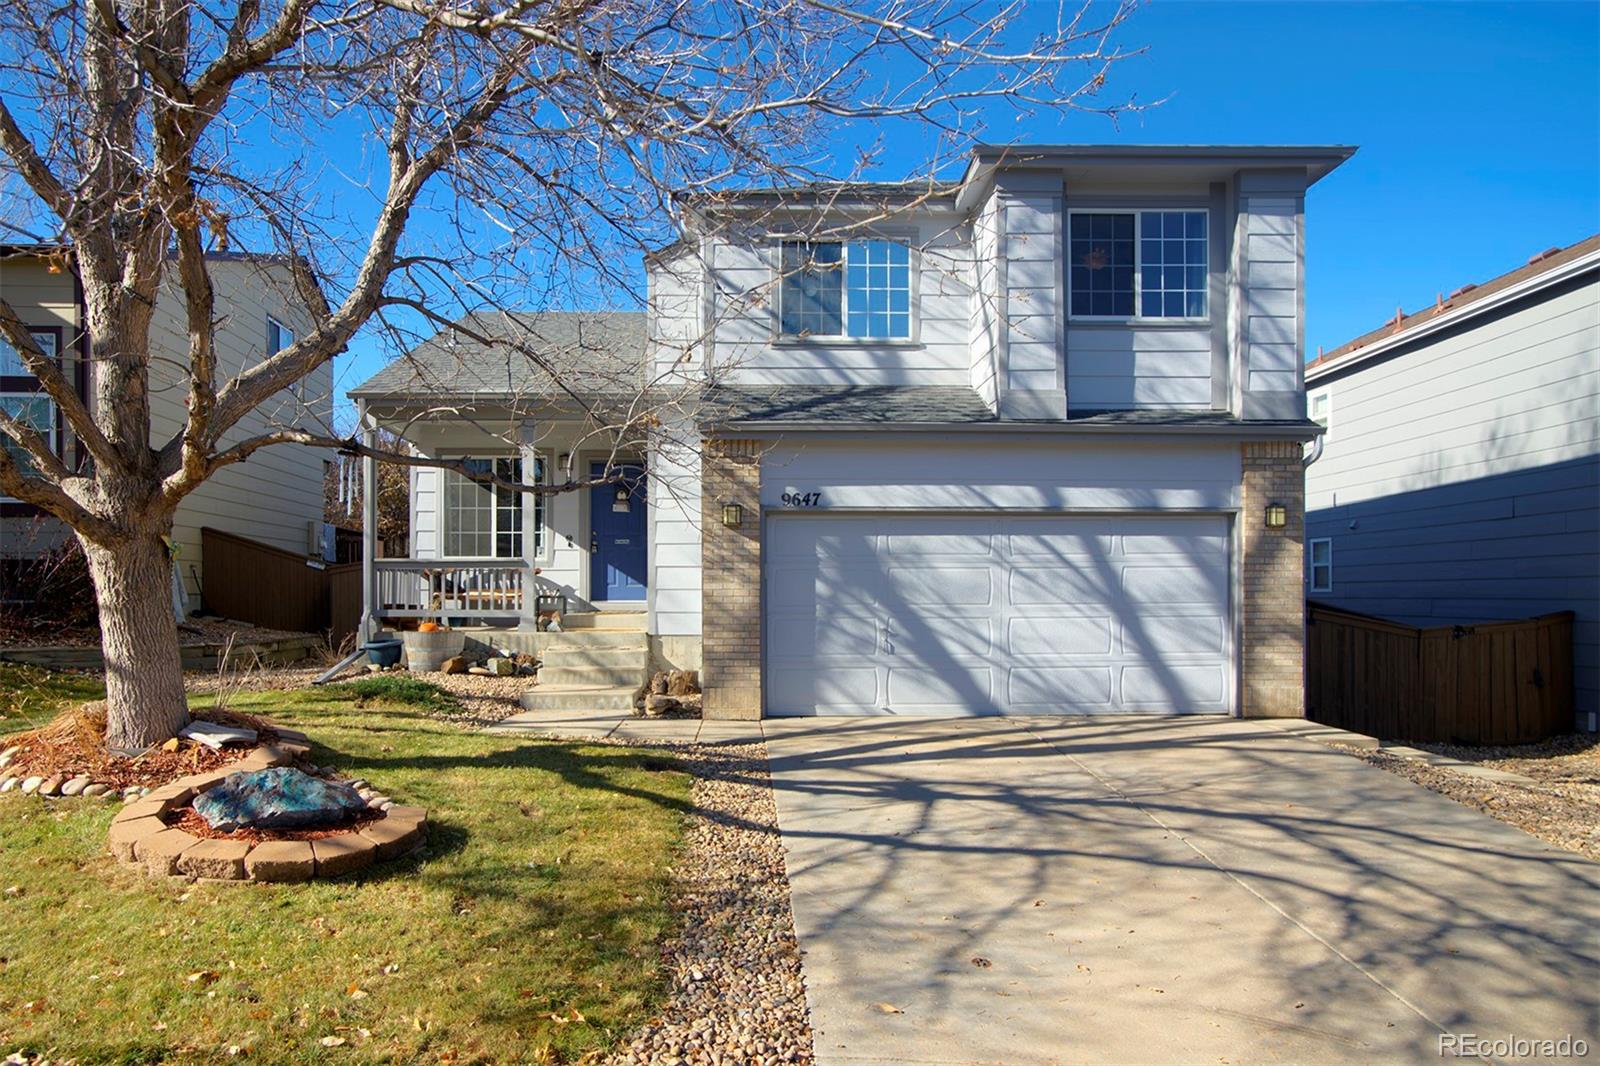 Report Image for 9647  Cove Creek Drive,Highlands Ranch, Colorado